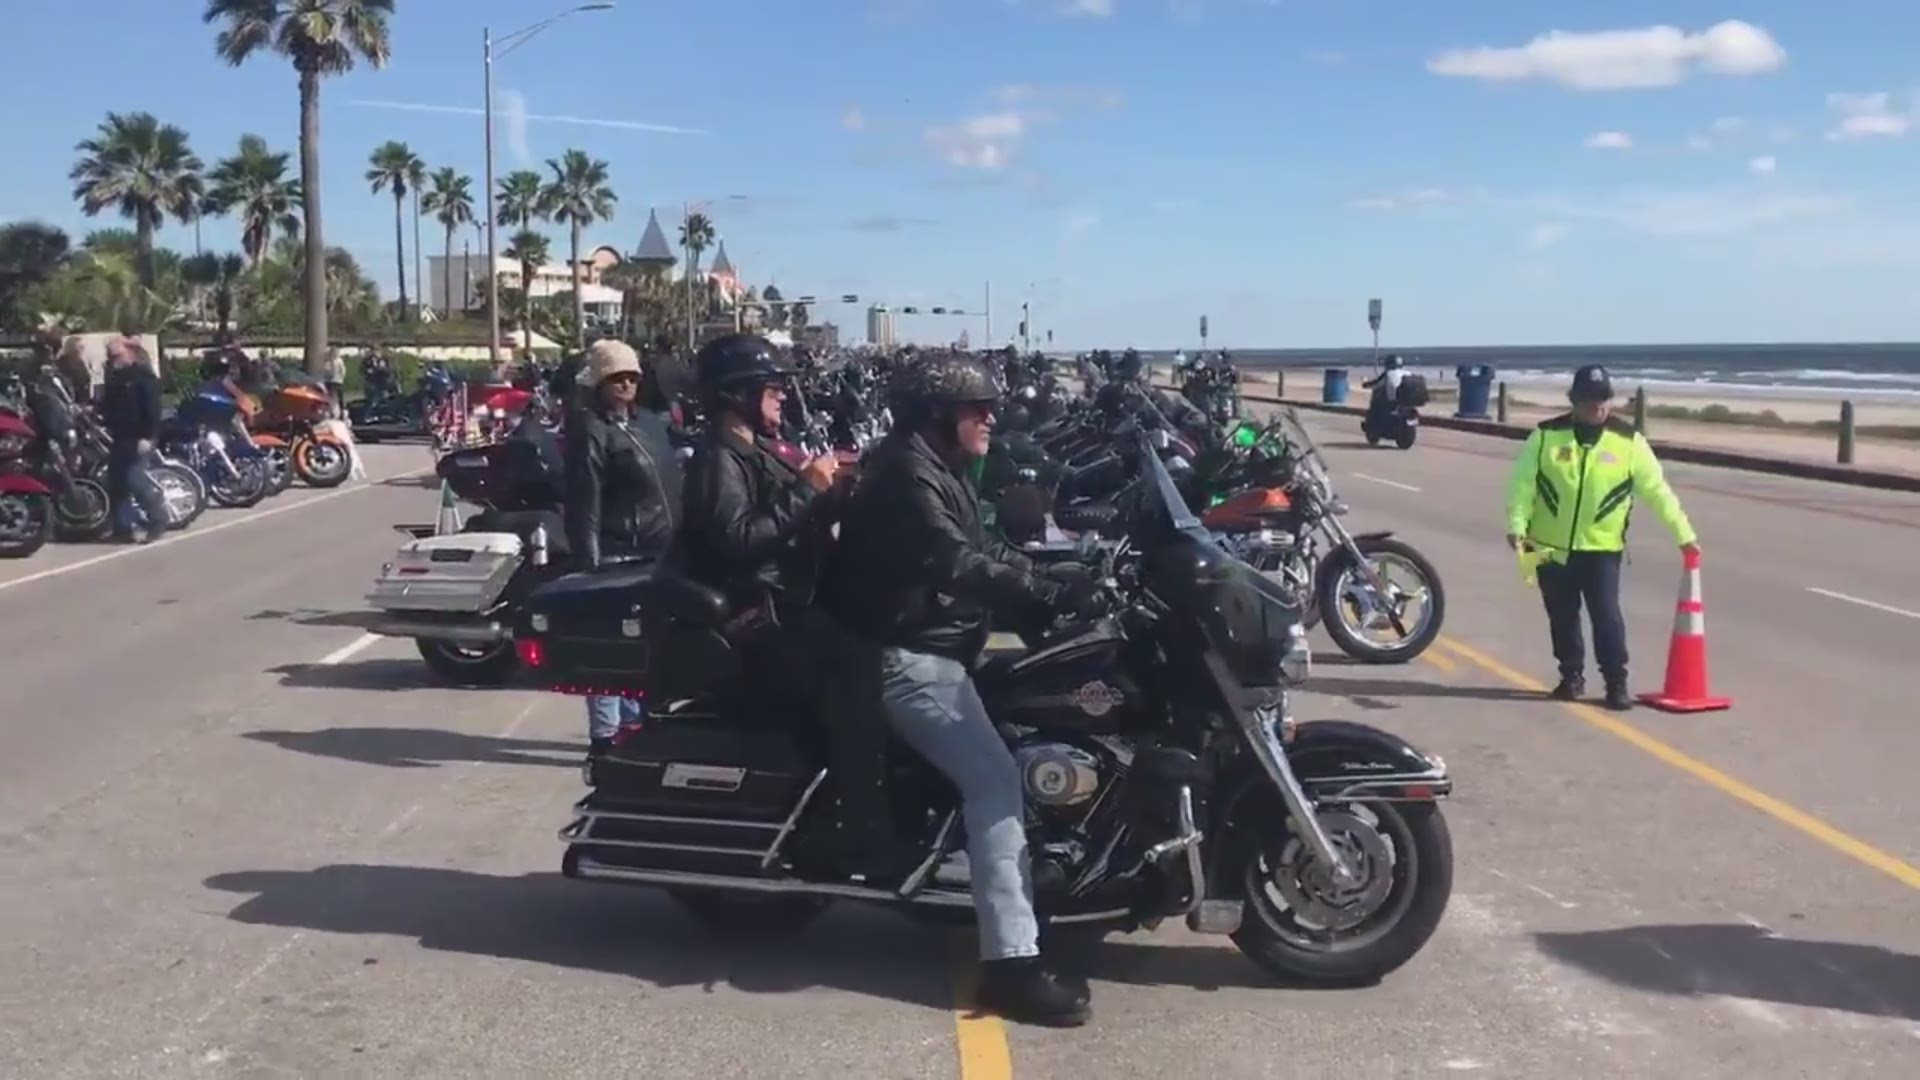 It's the Lone Star Rally in Galveston this weekend